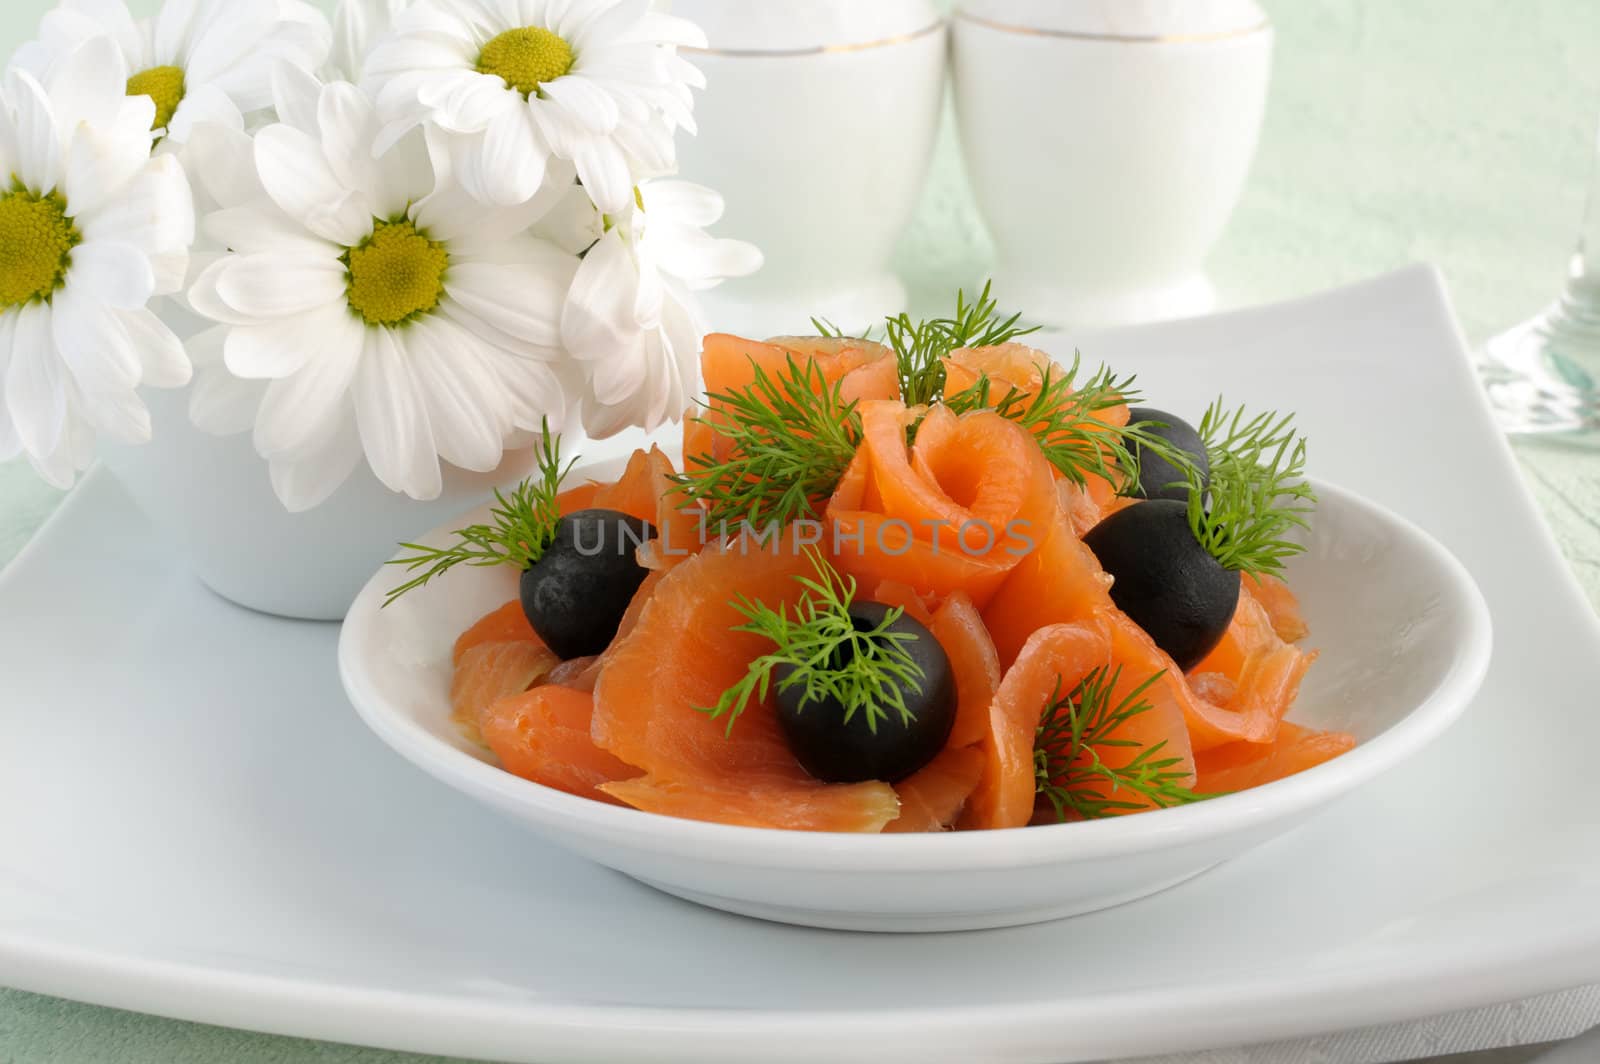 Appetizer of Salmon by Apolonia